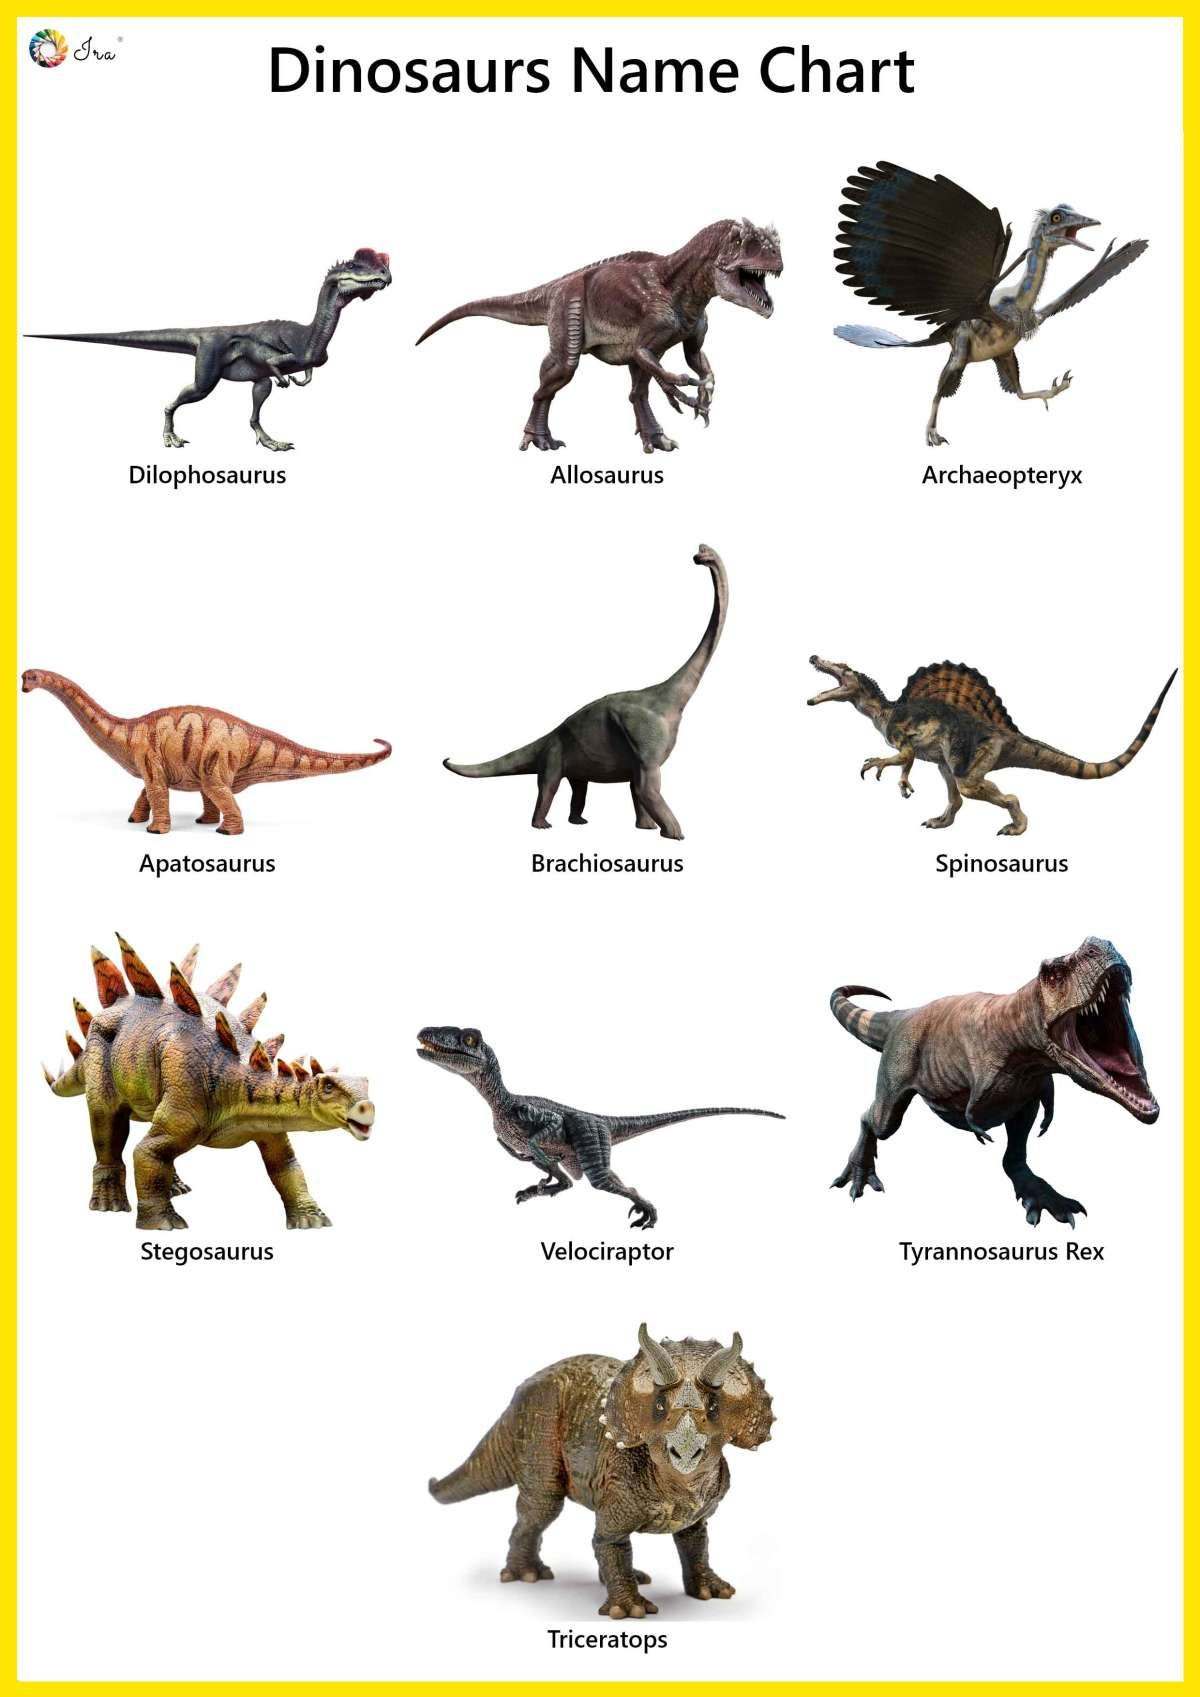 Printable Dinosaur Pictures With Names